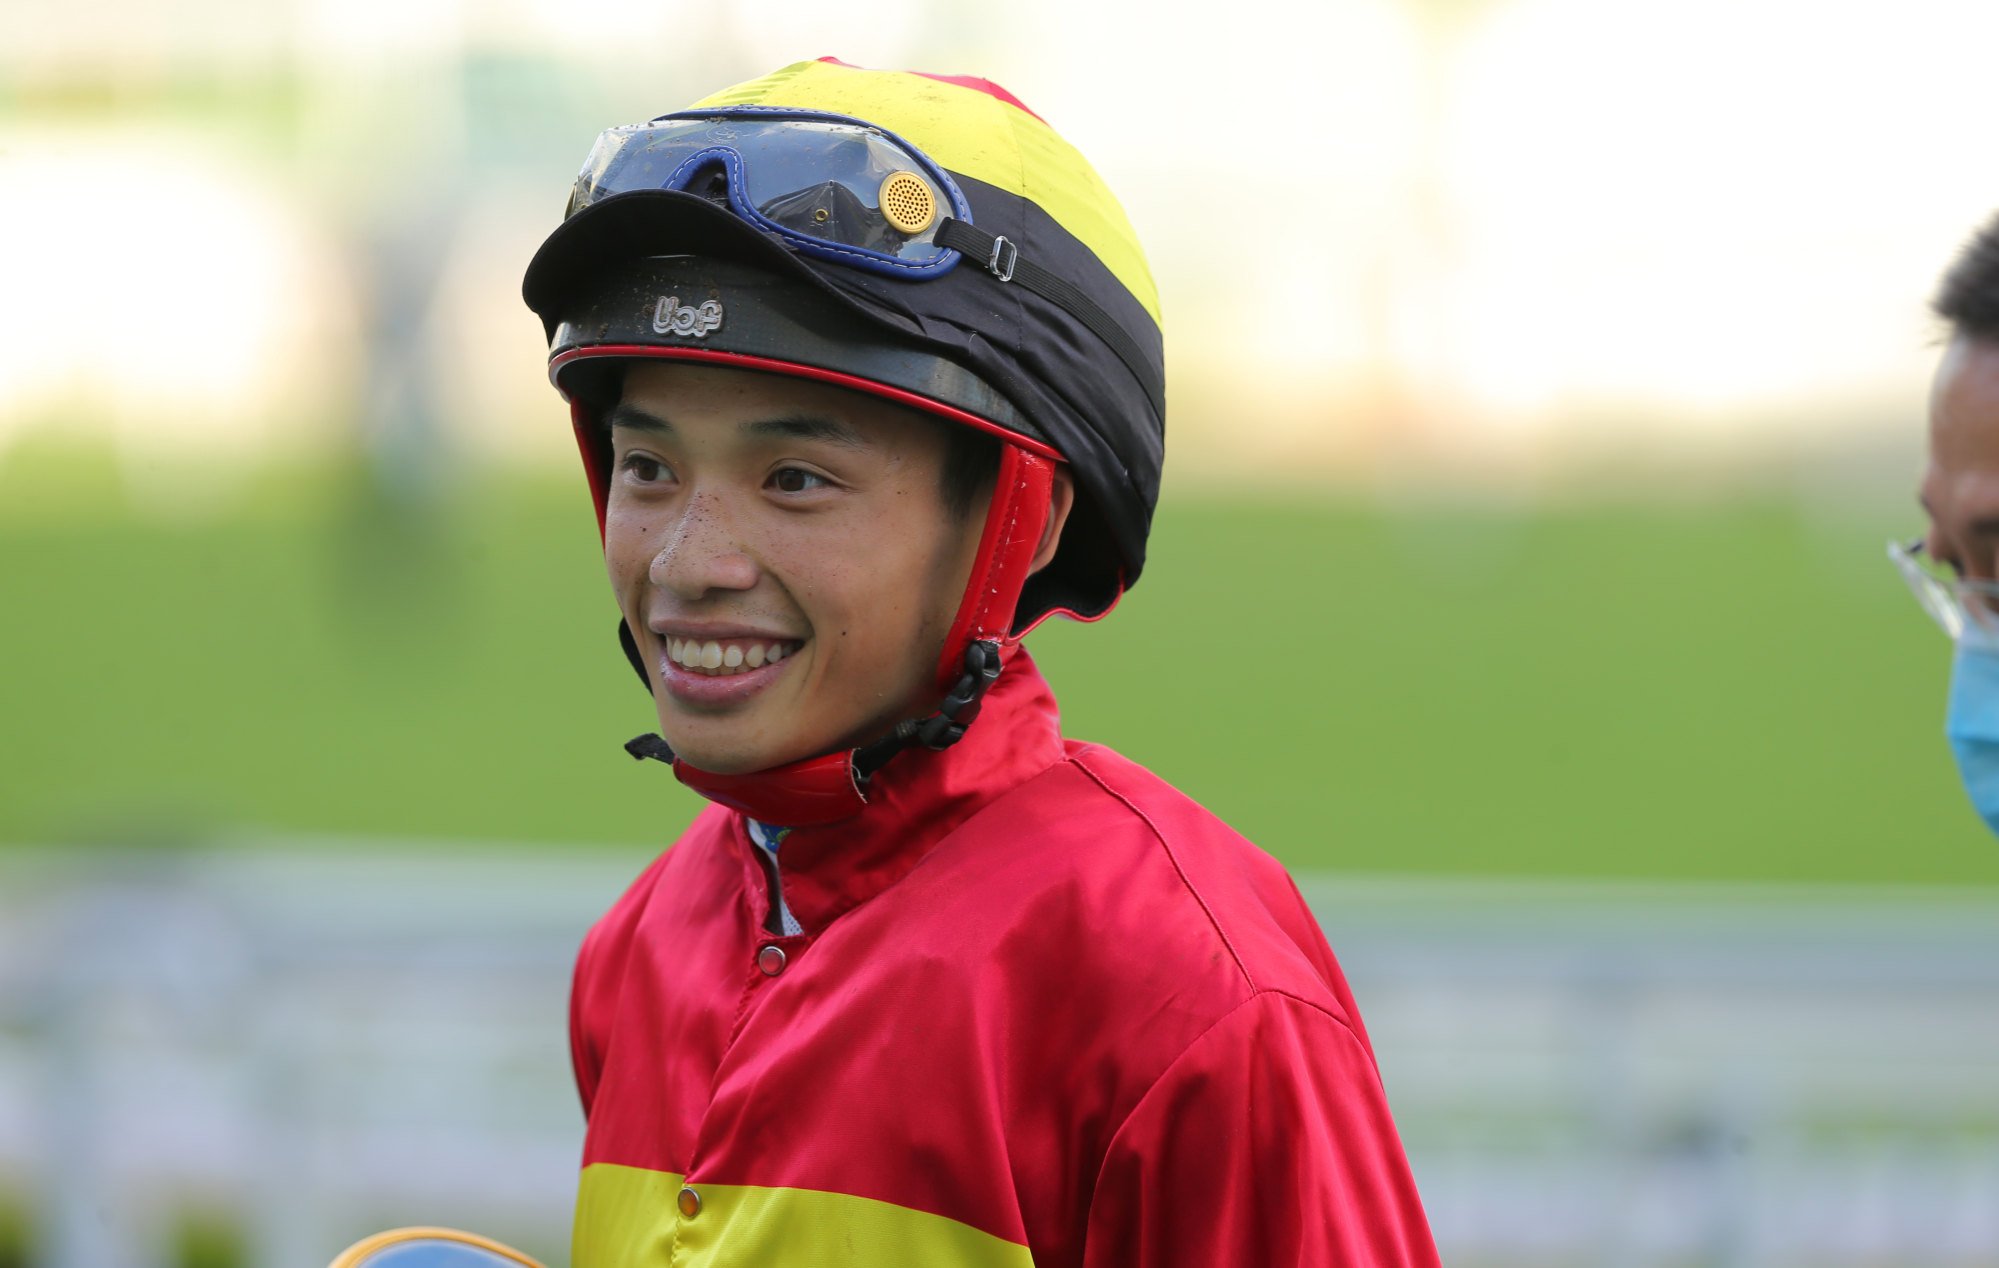 Jack Wong is all smiles after a winner.